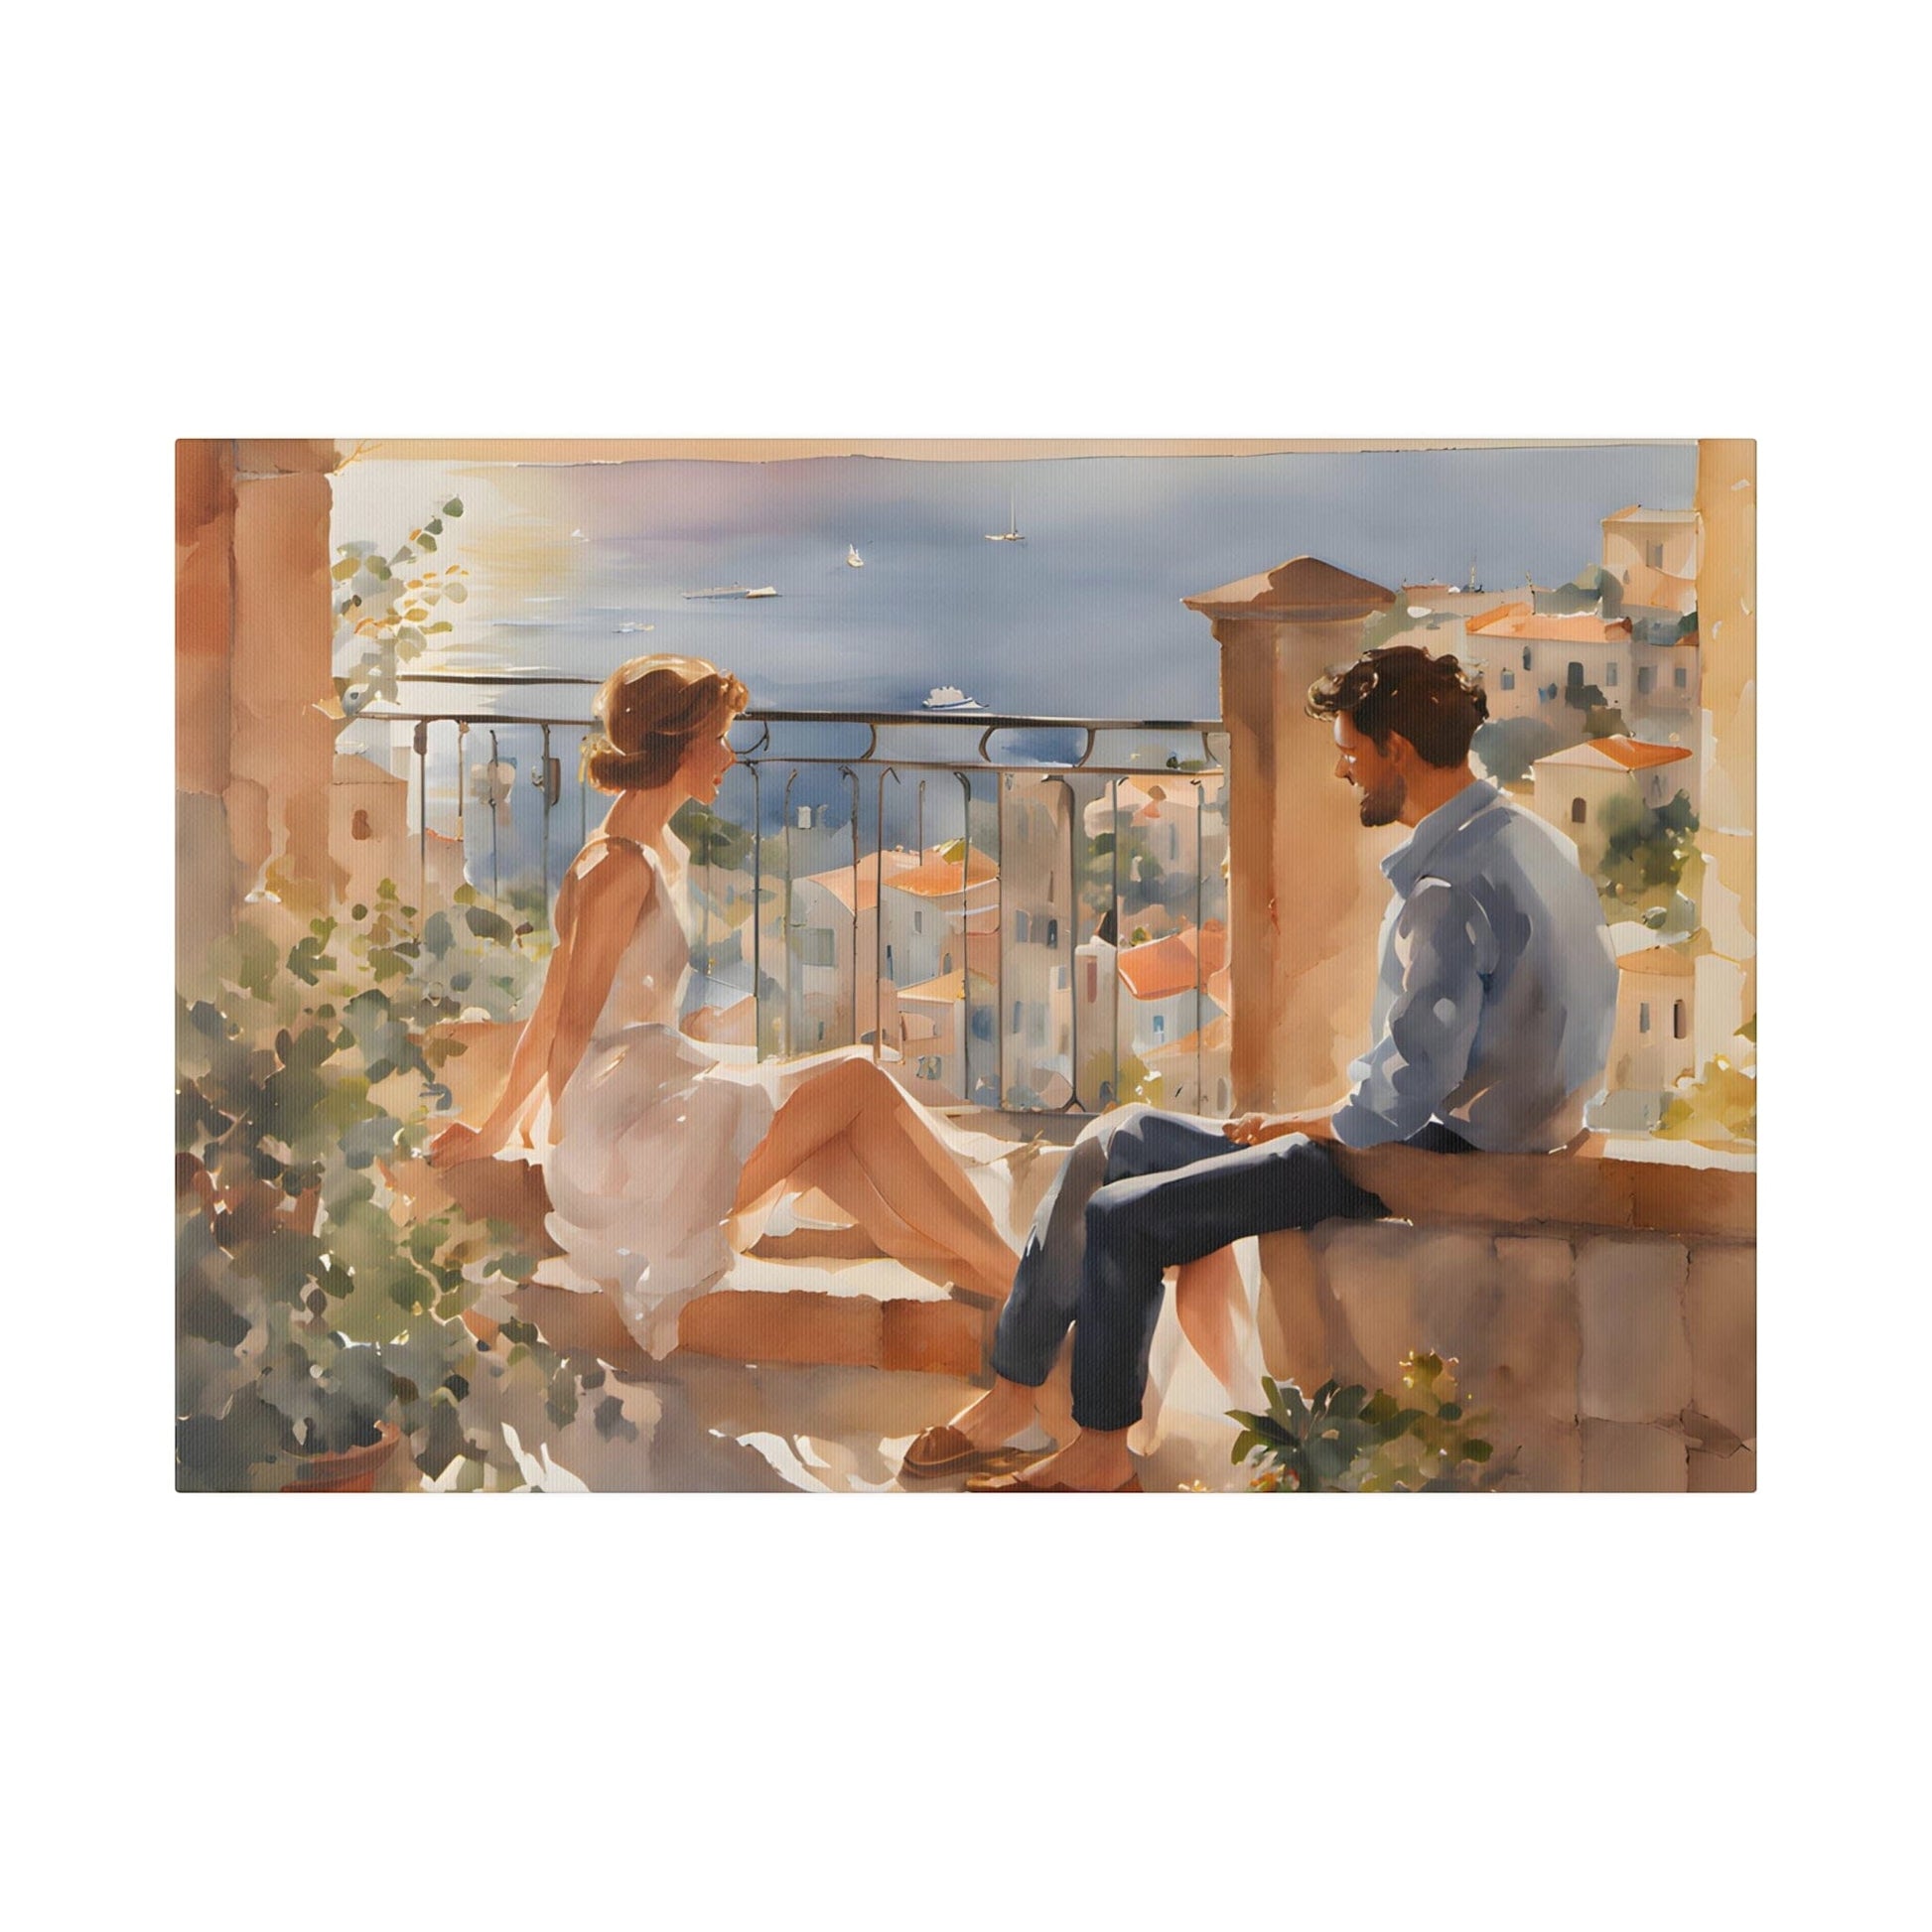 Isabella Marianne Fiori: Whispers by the Sea: Moments of Golden Intimacy. Canvas Graphic Print.